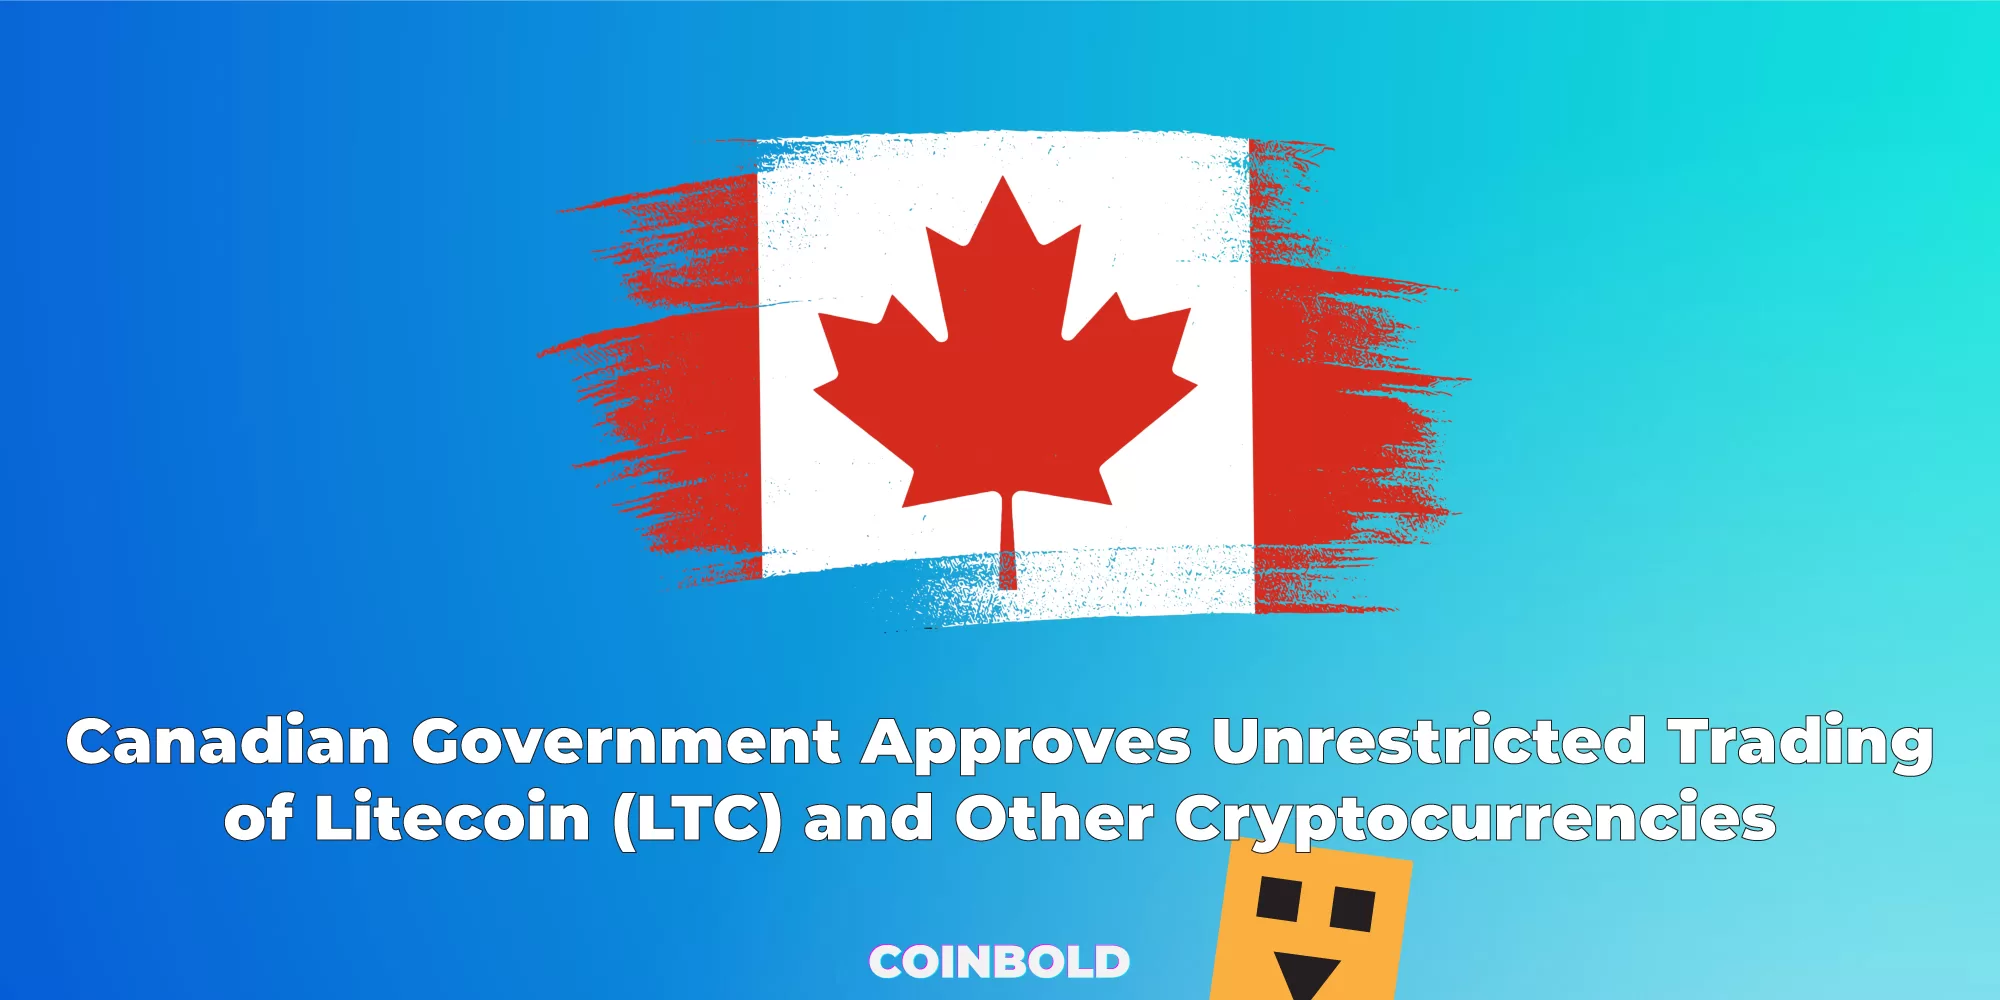 Canadian Government Approves Unrestricted Trading of Litecoin (LTC) and Other Cryptocurrencies